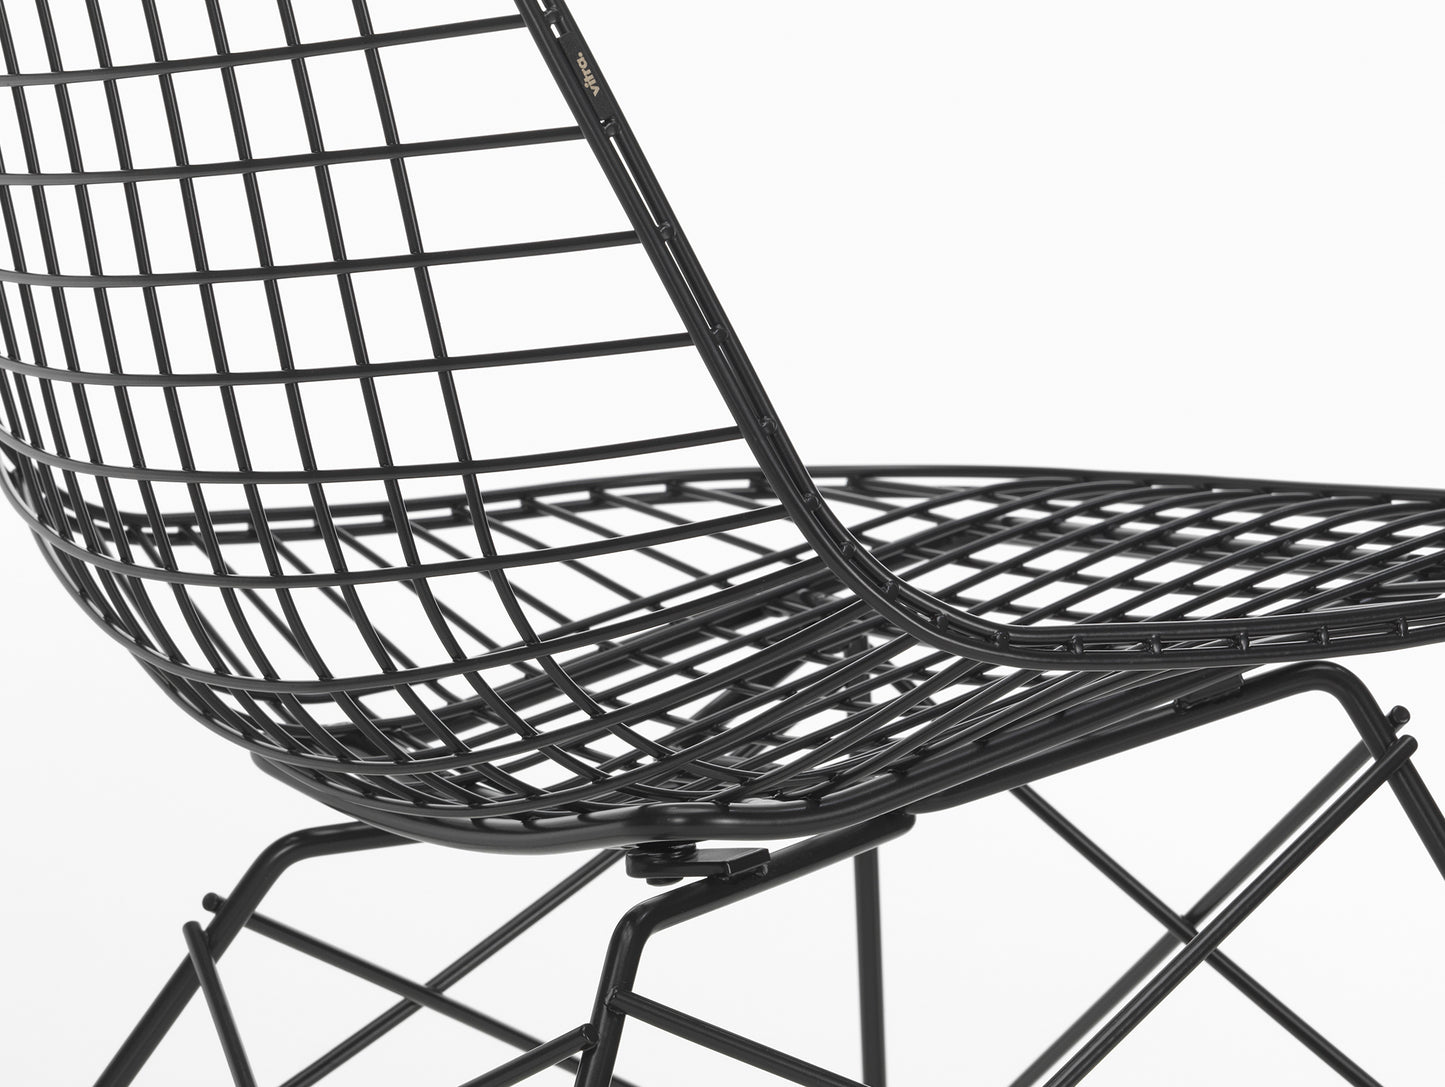 Eames LKR Wire Chair by Vitra - Basic Dark Powder-Coated Steel